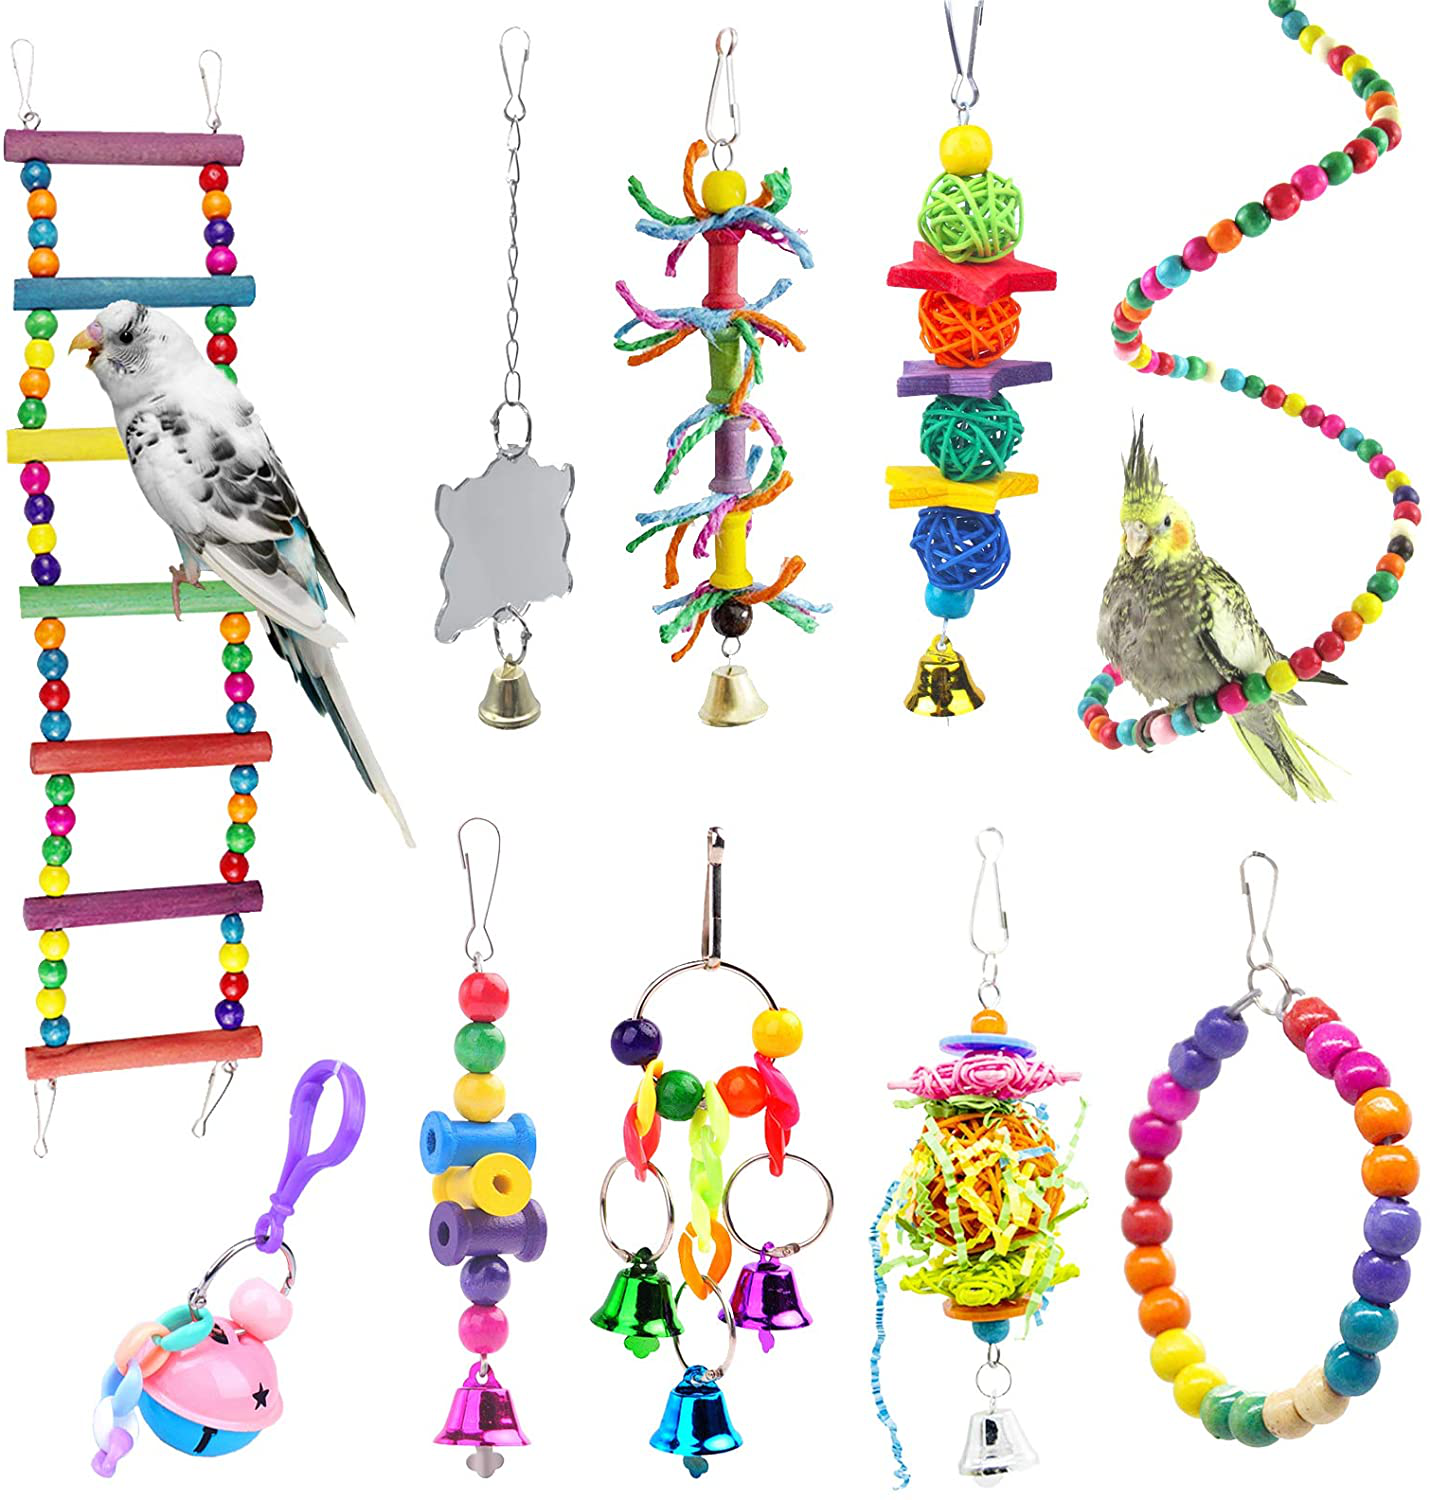 PINVNBY Bird Parrot Swing Chewing Toys Hanging Hammock Bell Pet Birds Cage Toys Wooden Perch with Wood Beads for Small Parakeets, Parrots, Conures, Love Birds, Cockatiels, Macaws, Finches